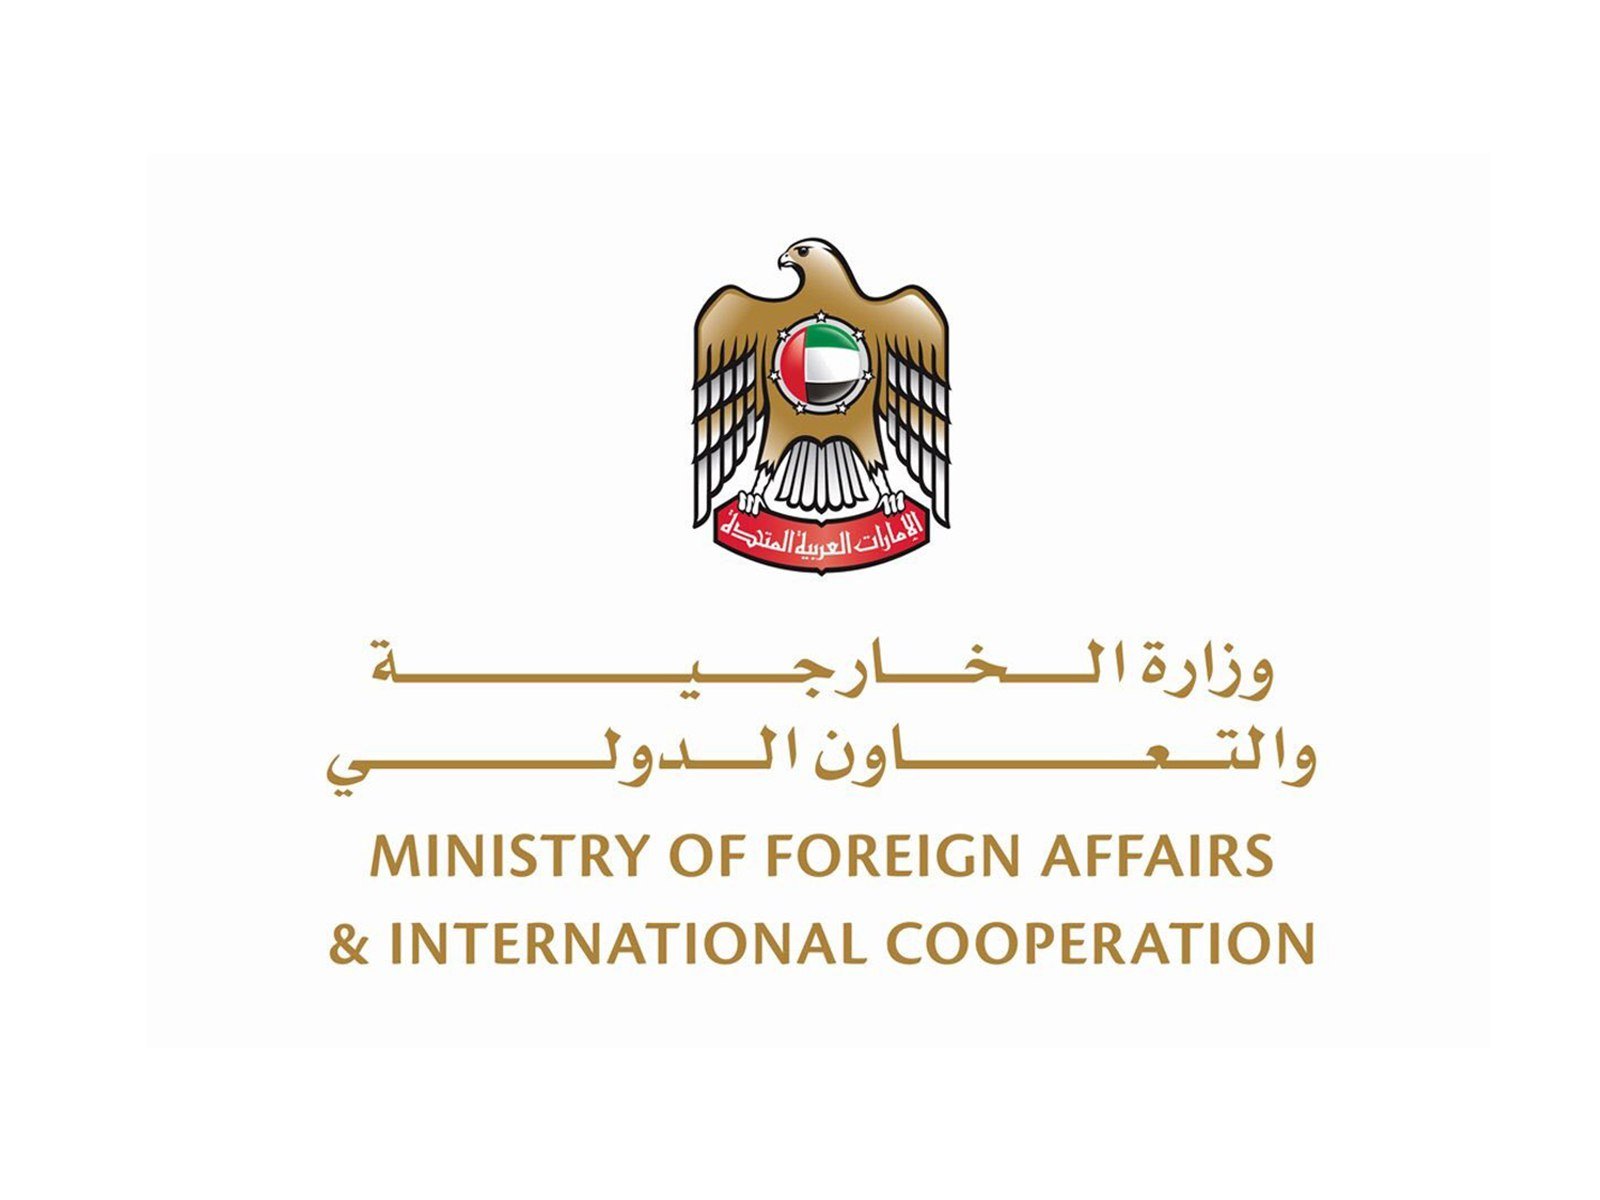 The United Arab Emirates condemns the assassination of Iranian scientists and calls on all parties to exercise restraint.